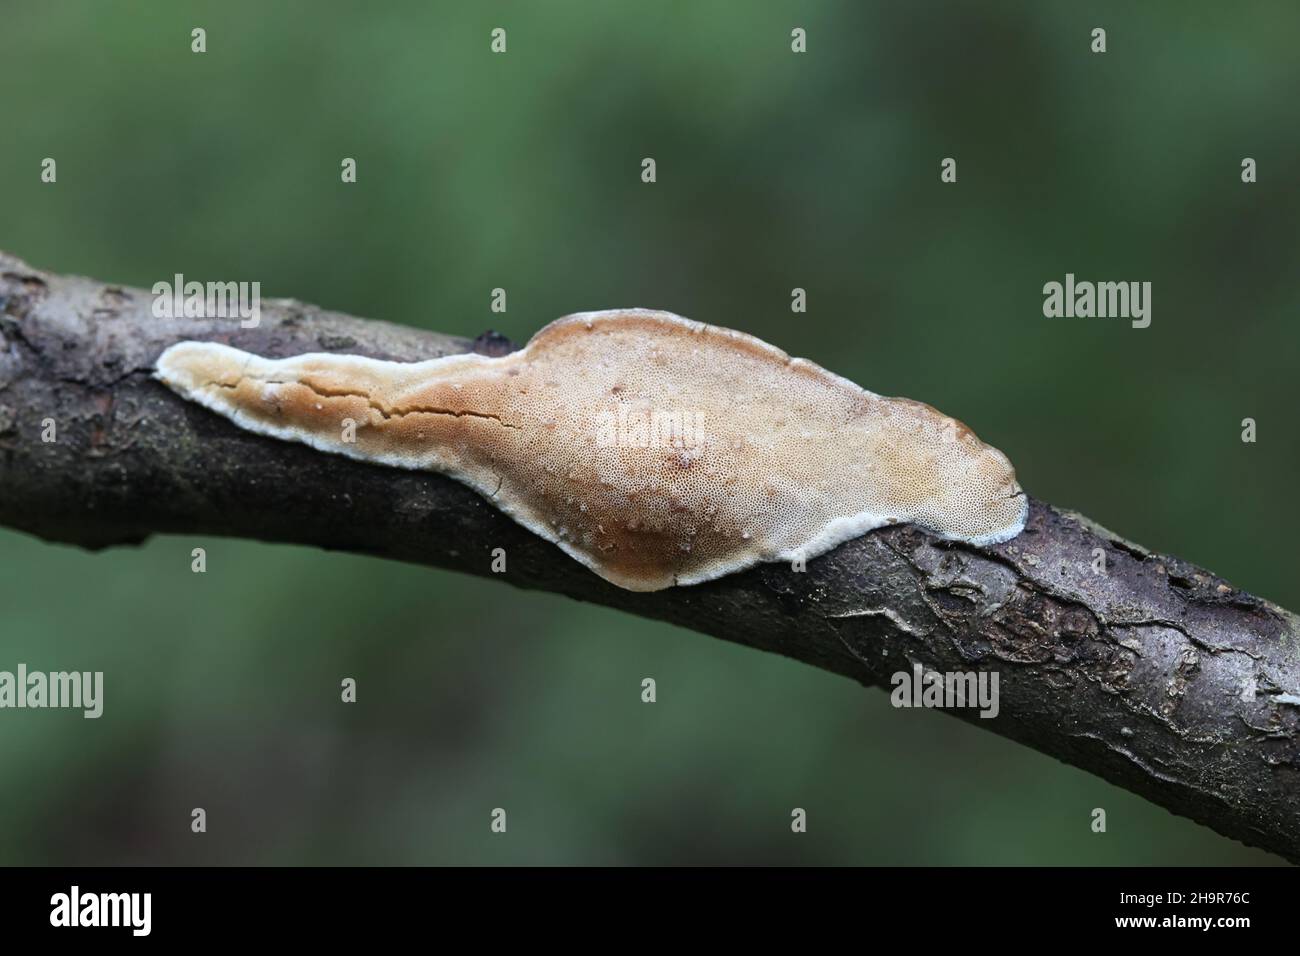 Dichomitus campestris, also called Polyporus campestris, commonly known as Hazel porecrust, wild polypore fungus from Finland Stock Photo